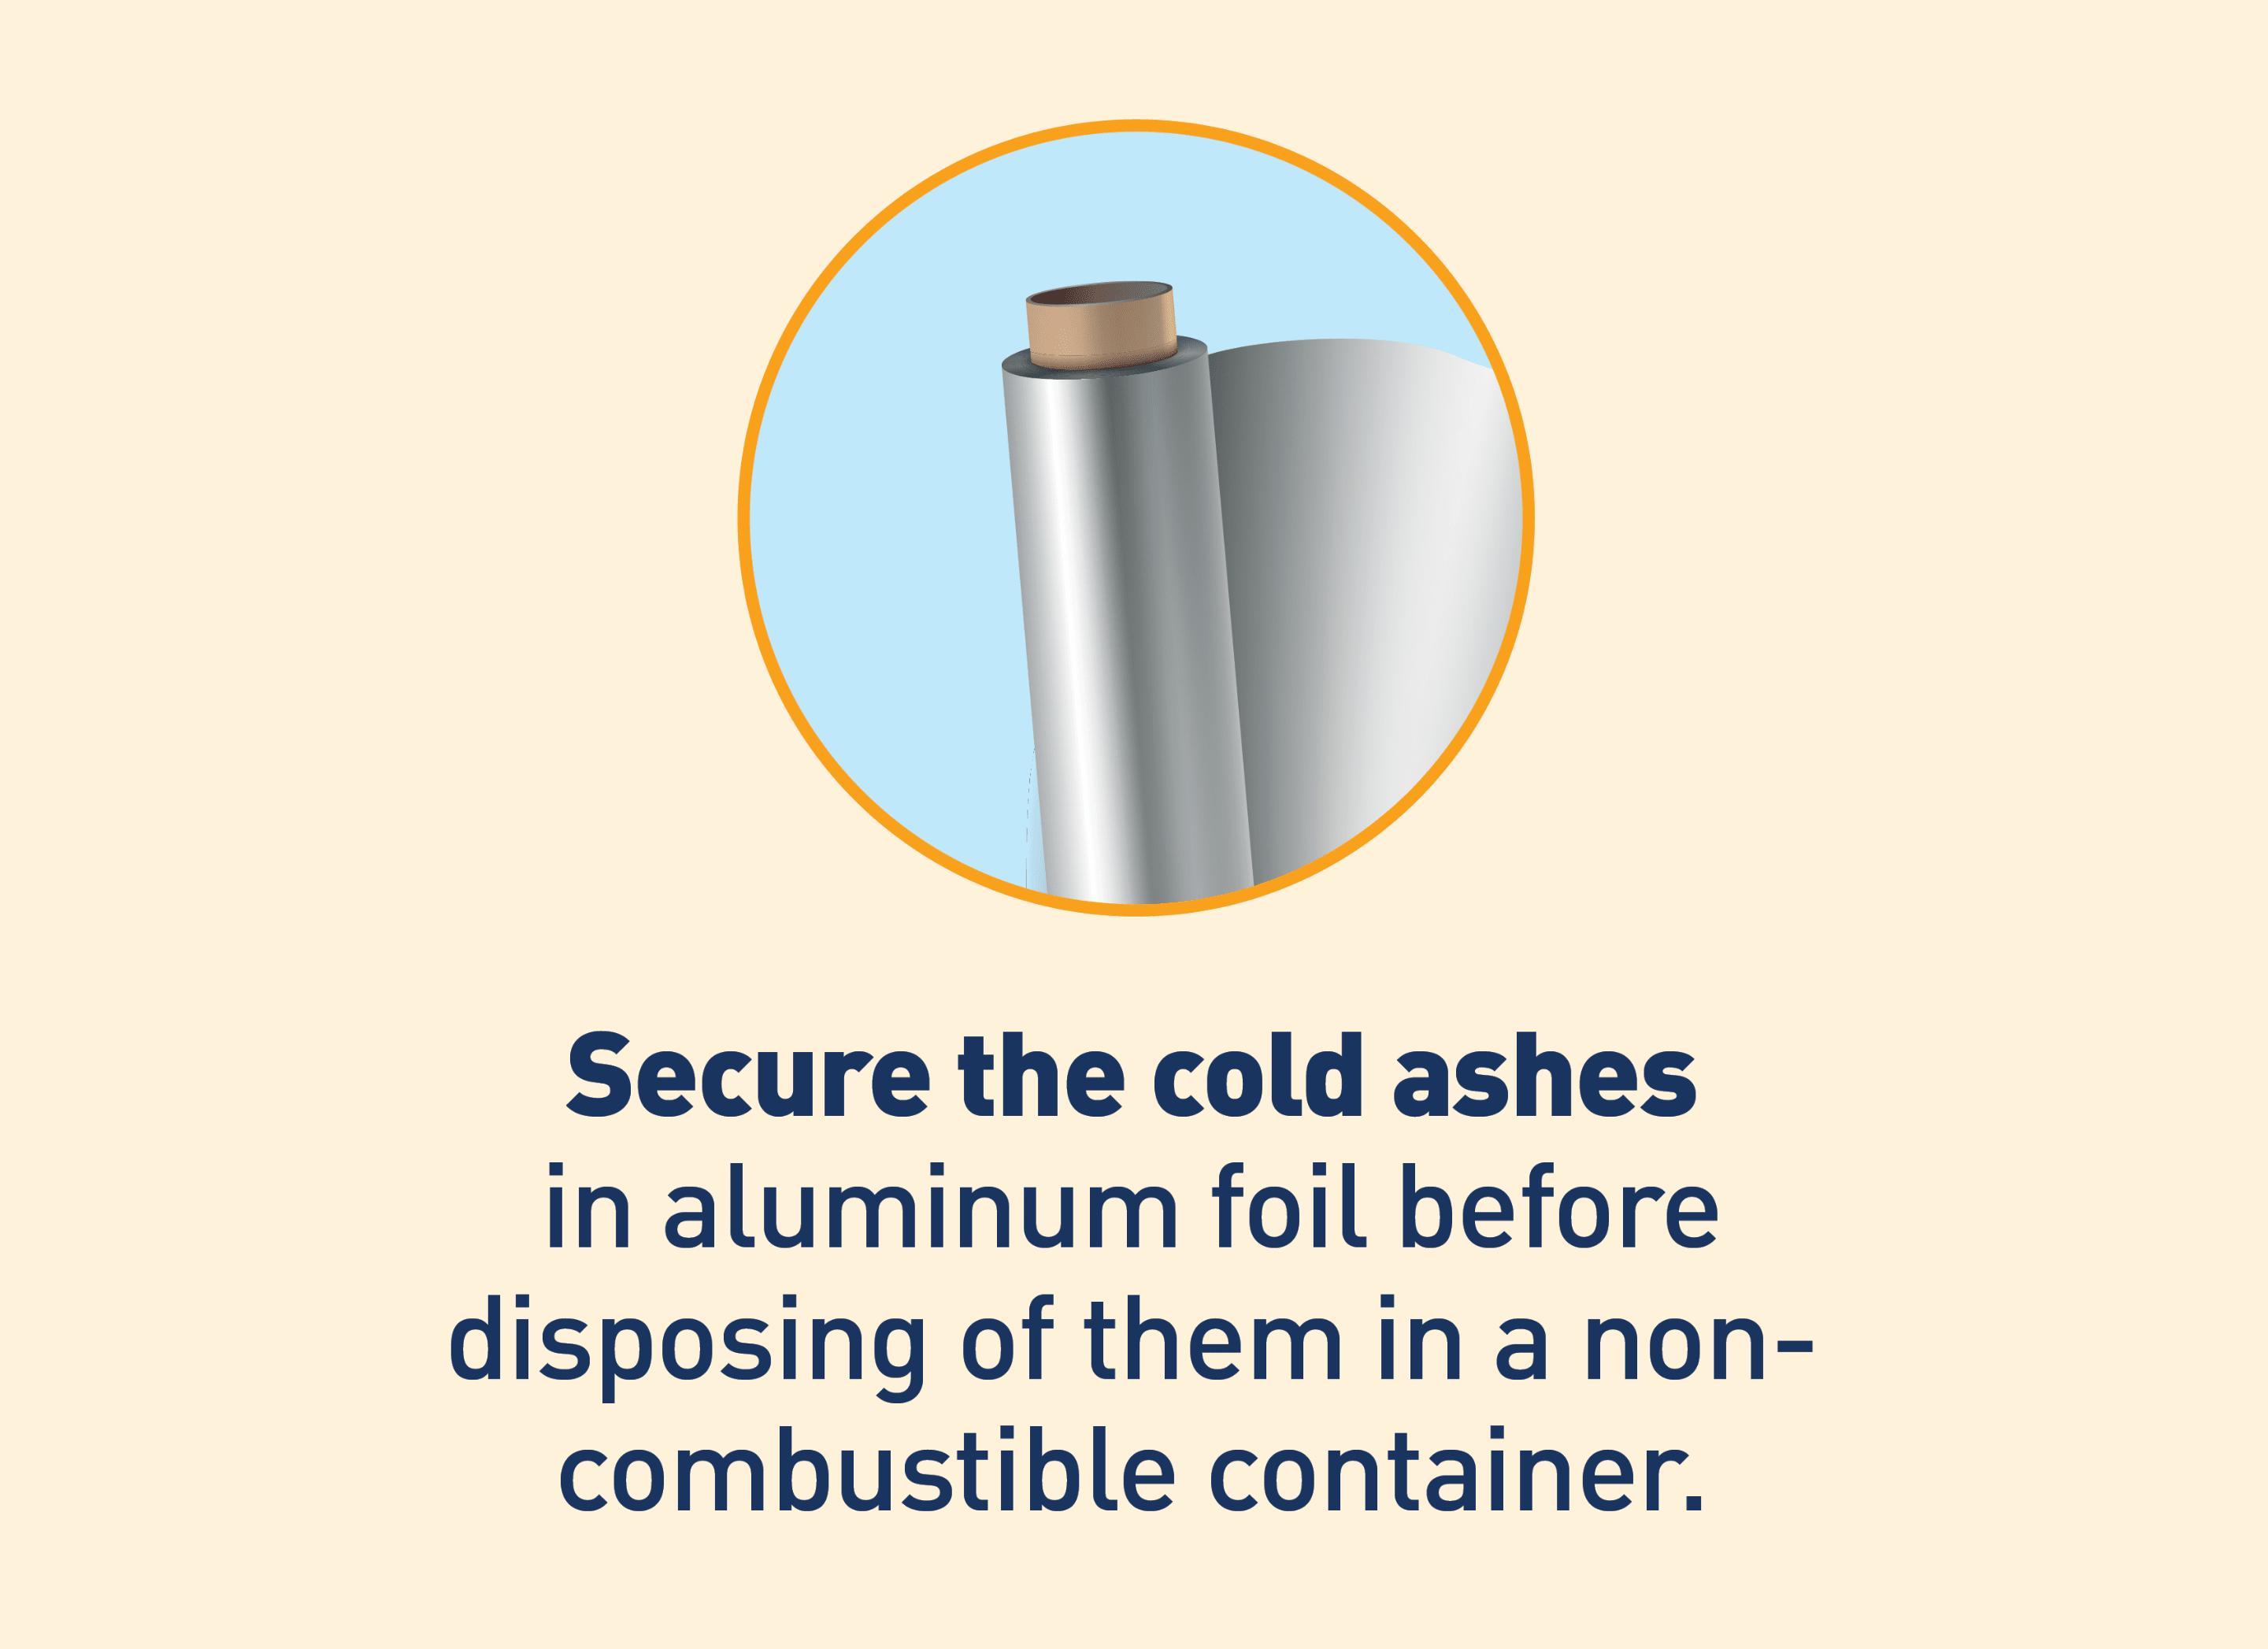 Graphic of aluminum foil. Text: Secure the cold ashes in aluminum foil before disposing of them in a non-combustible container.